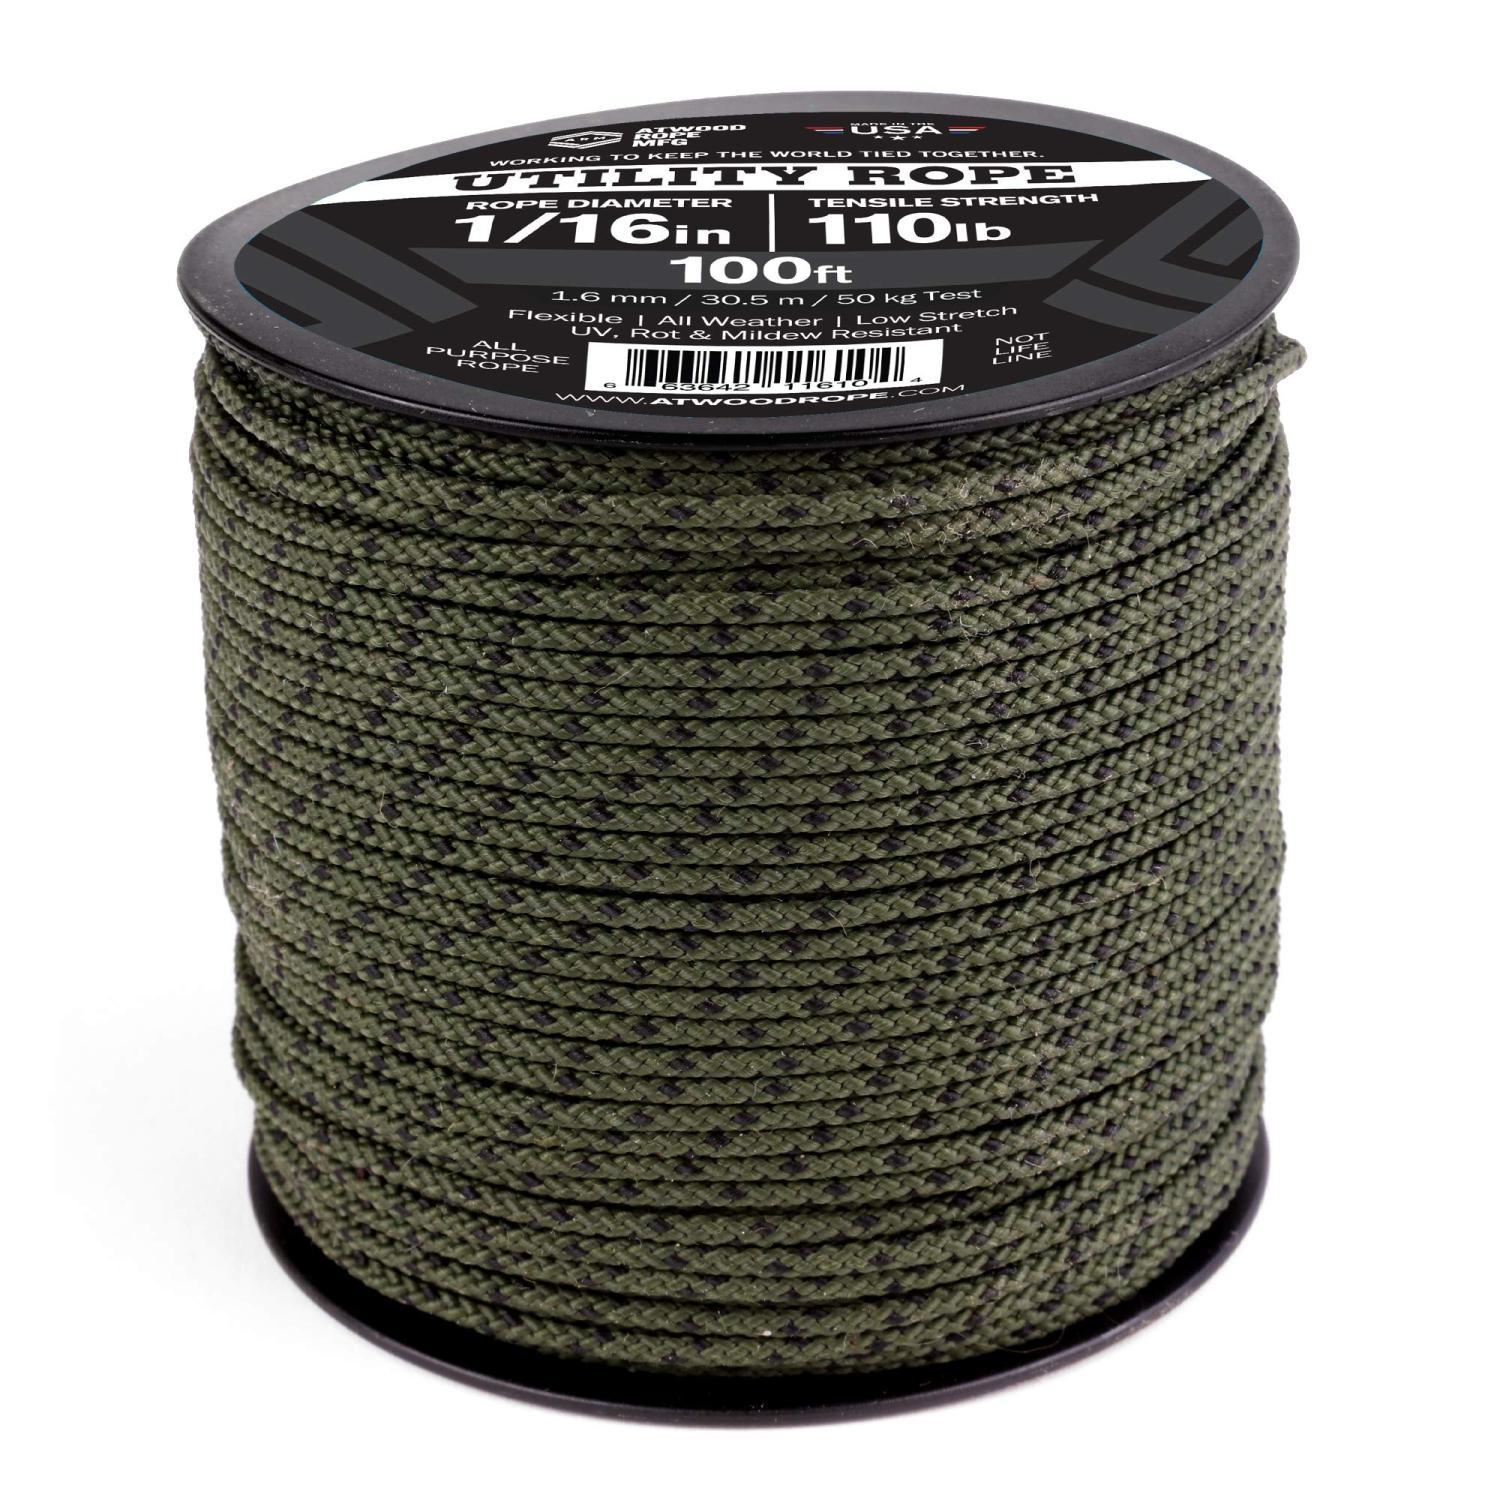 Atwood Rope MFG 1/16 Utility Cord 1.6mm x (Spool Length) Reusable Spool   Tactical Nylon/Polyester Fishing Gear, Jewelry Making, Camping Accessories  Camo 100.0 Feet